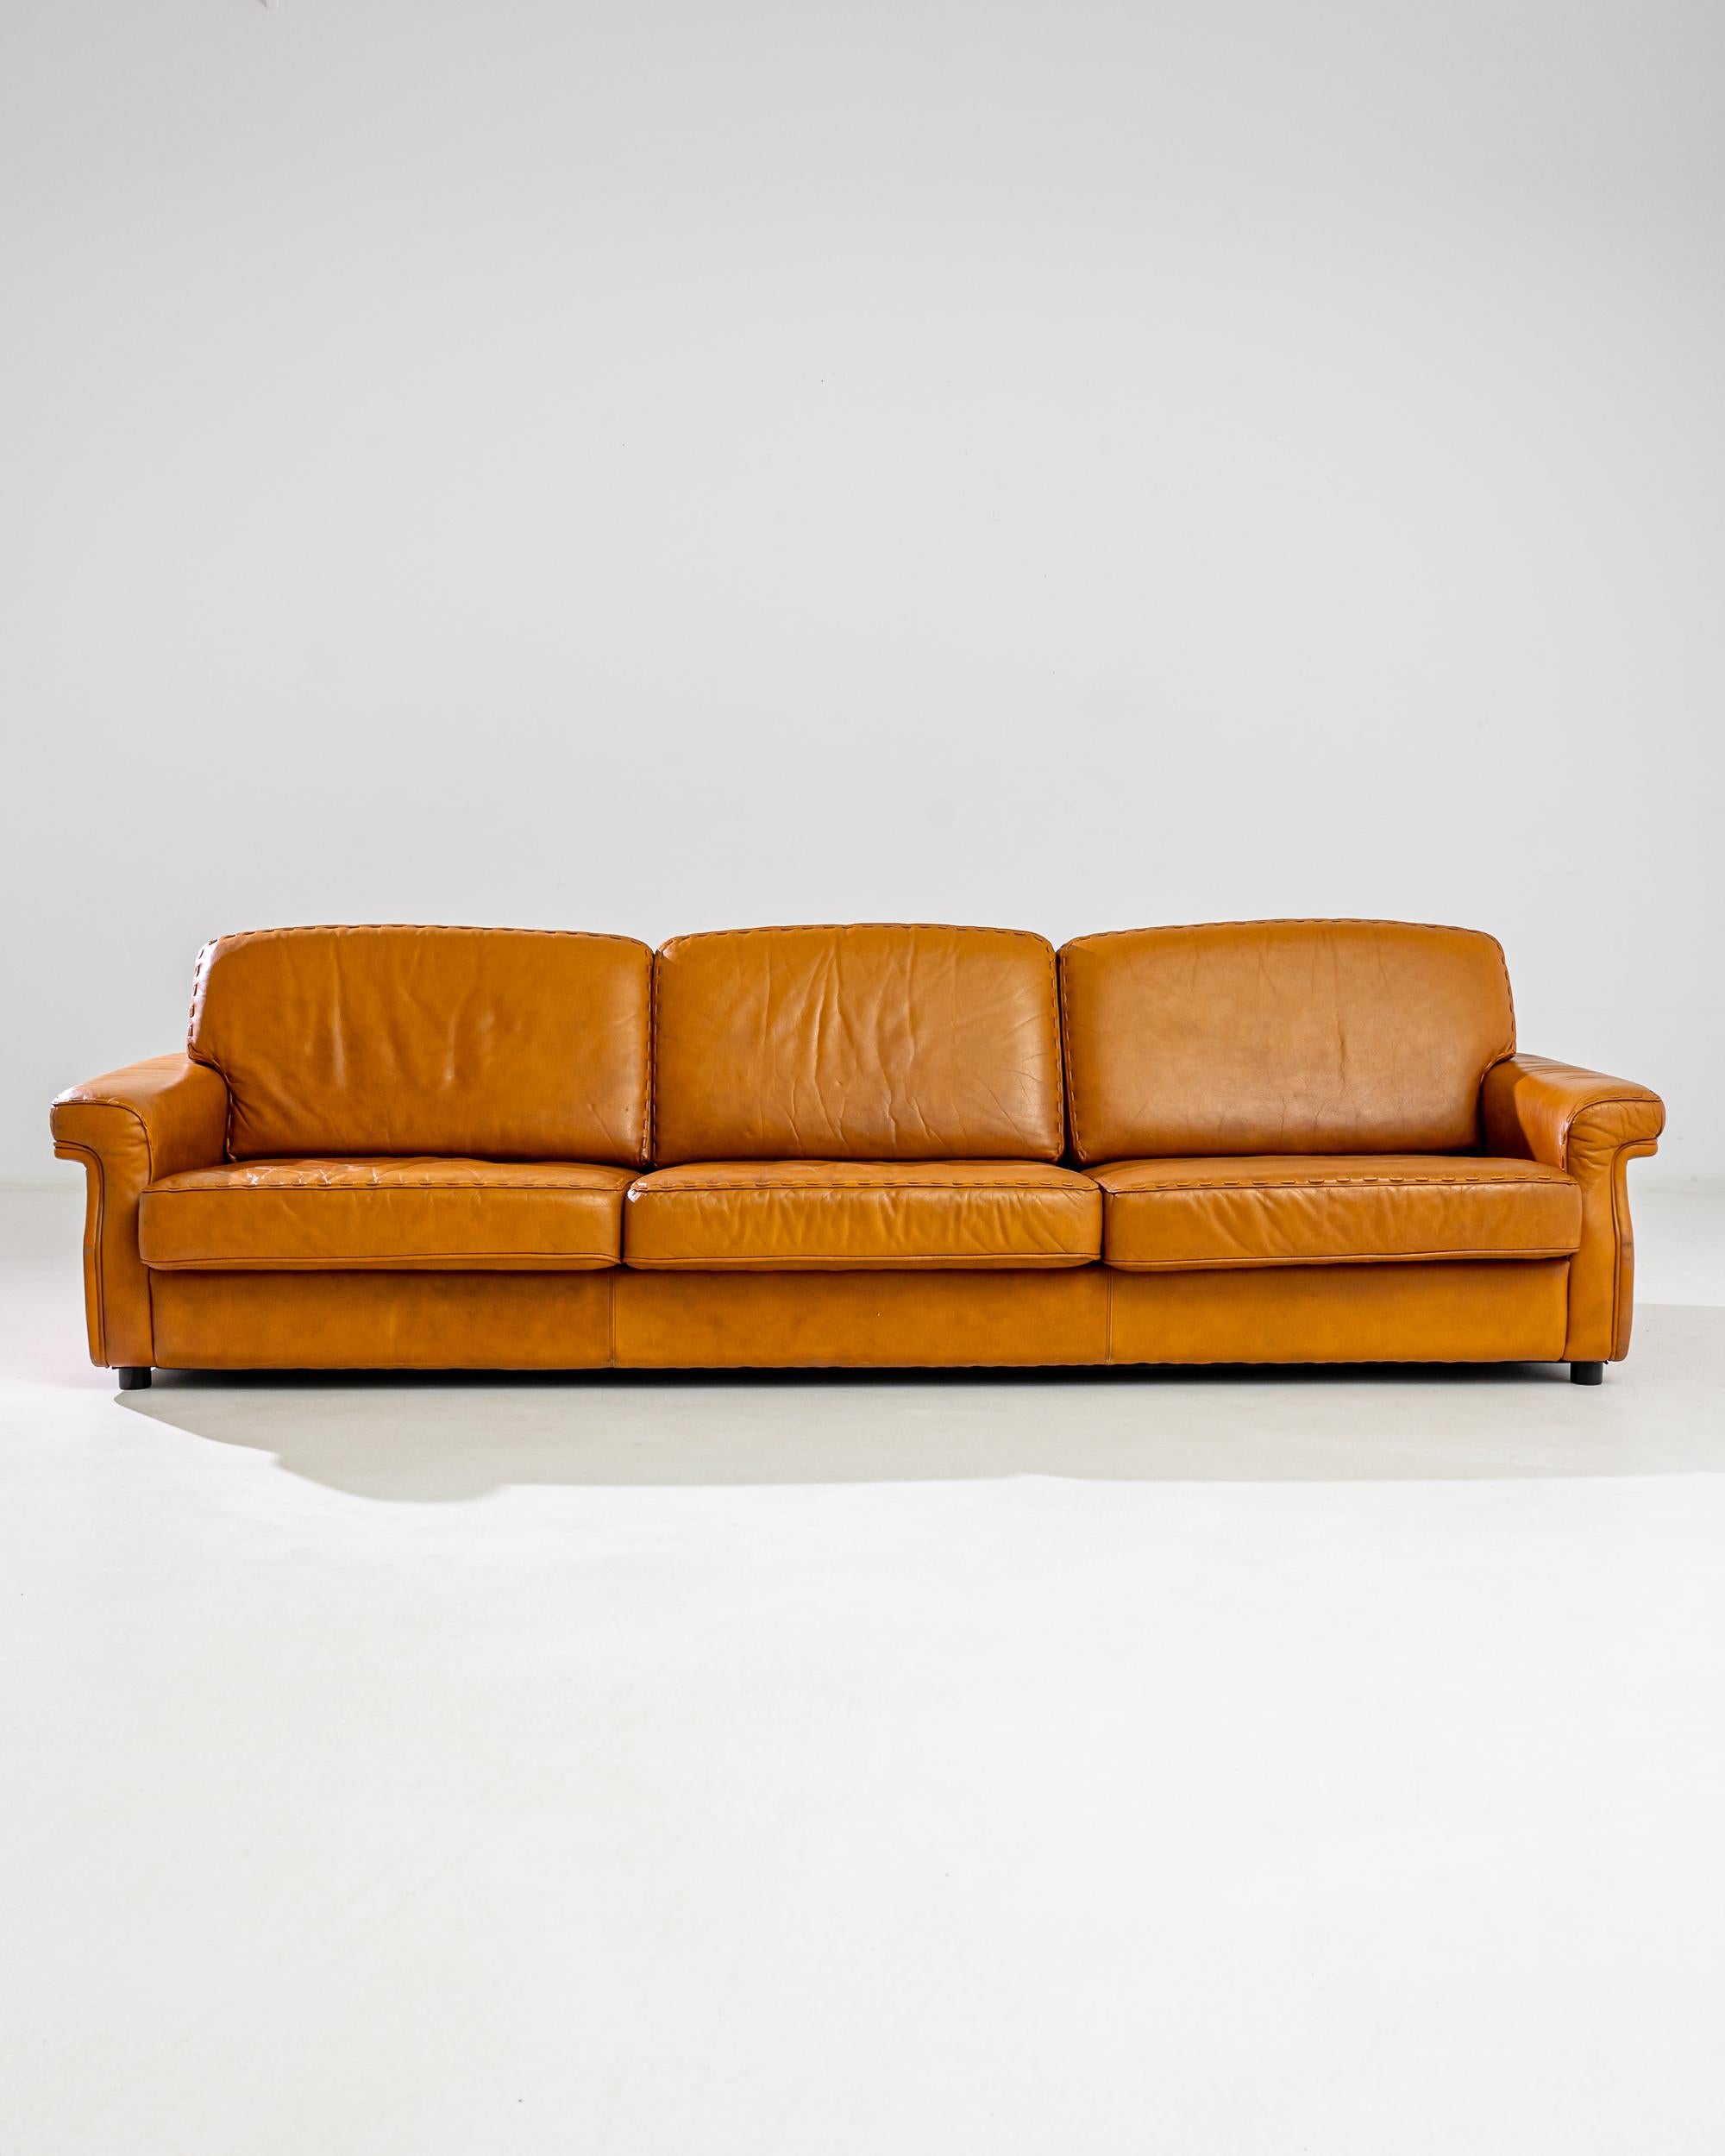 Made in Scandinavia, this vintage three-seater sofa features comfortable wide cushions and curved armrests held up by a sturdy base. The intense tawny hue of the high quality leather upholstery exudes warmth and coziness accentuated by the